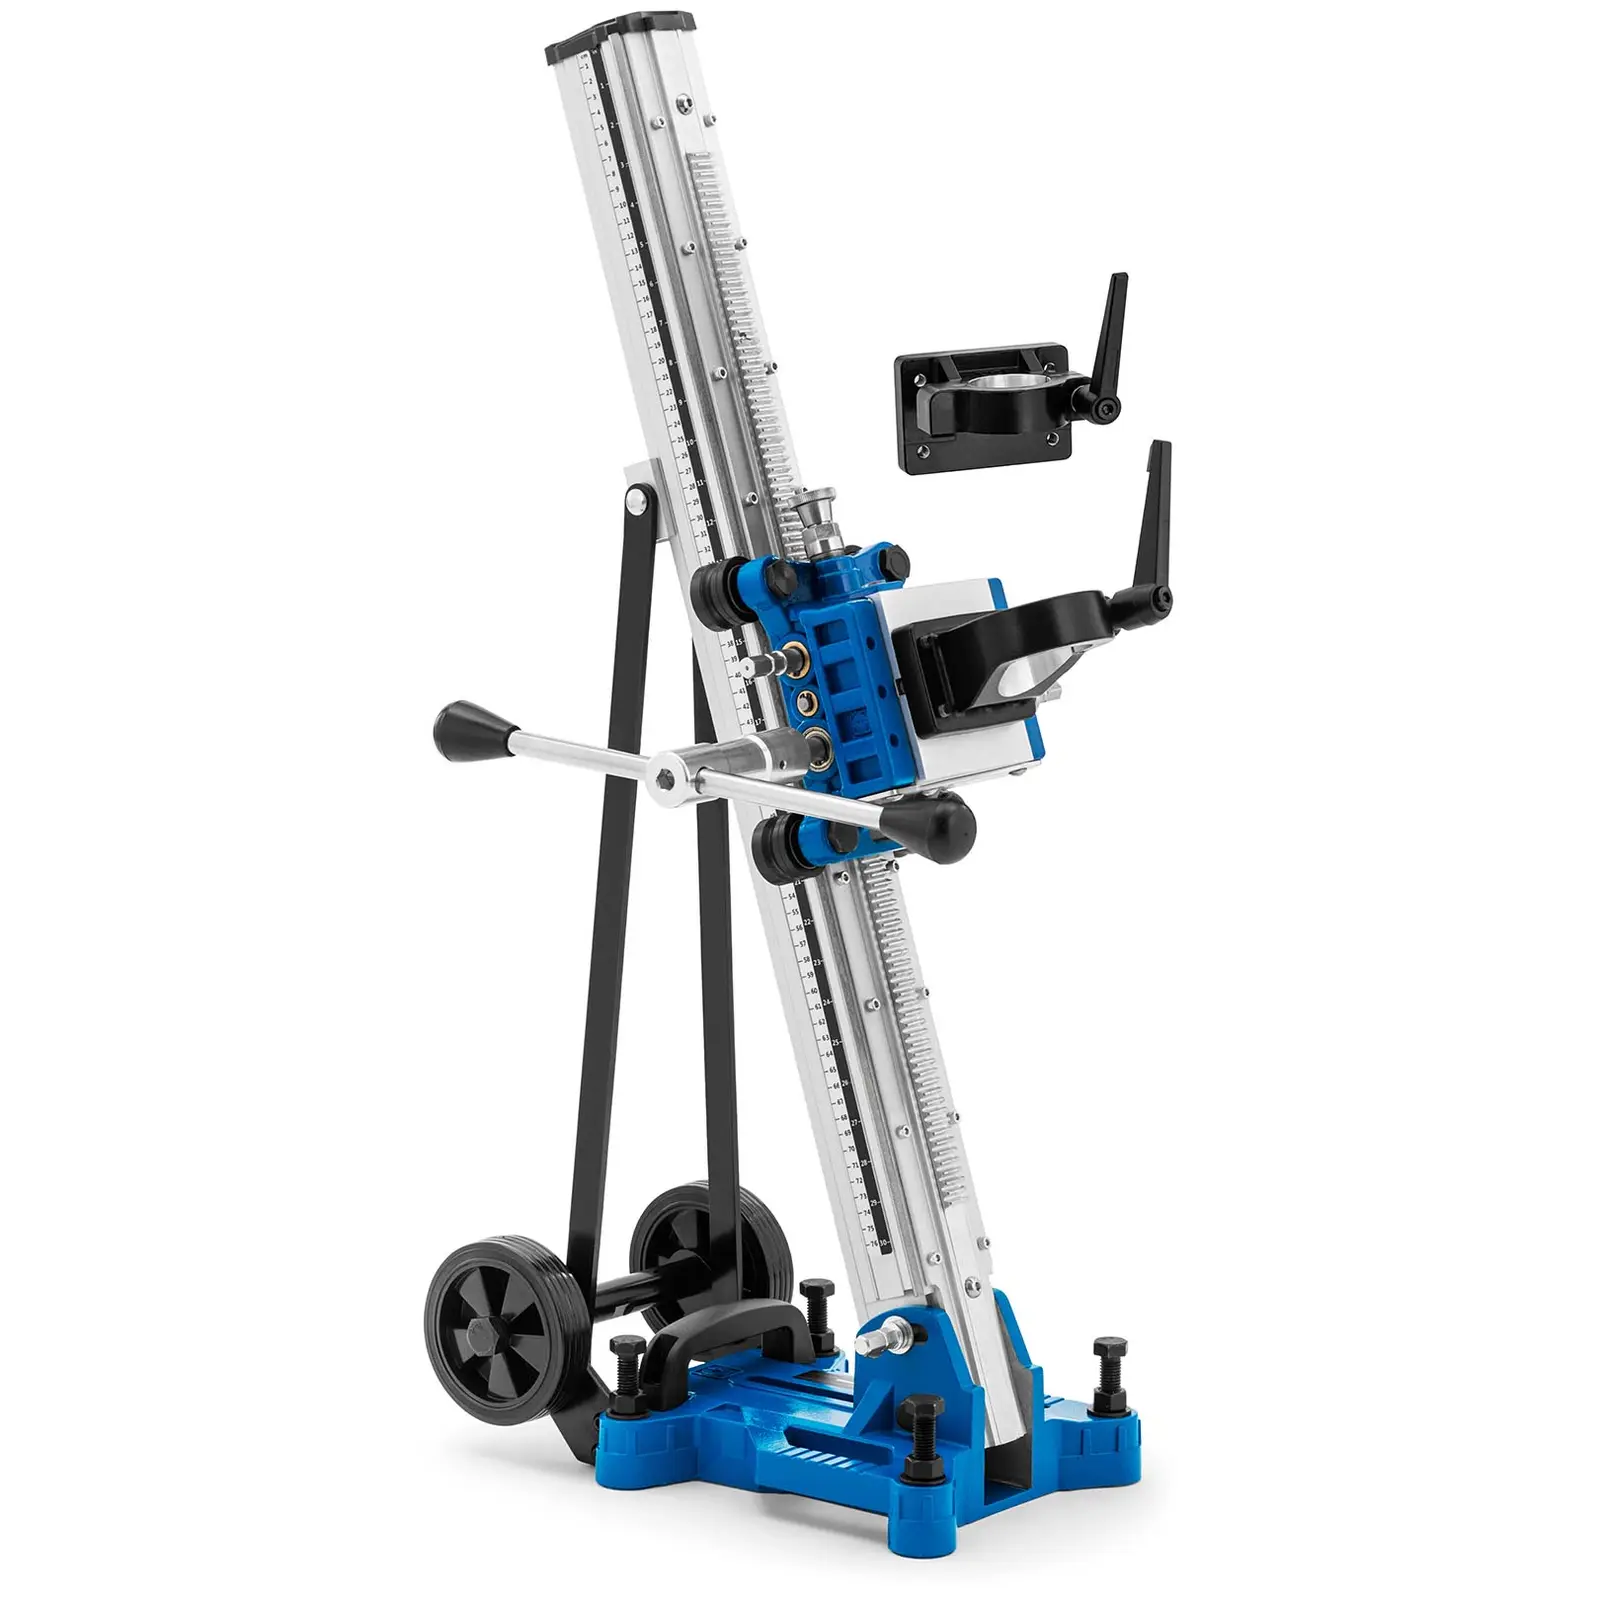 Core Drill Stand - drill diameter up to 350 mm 